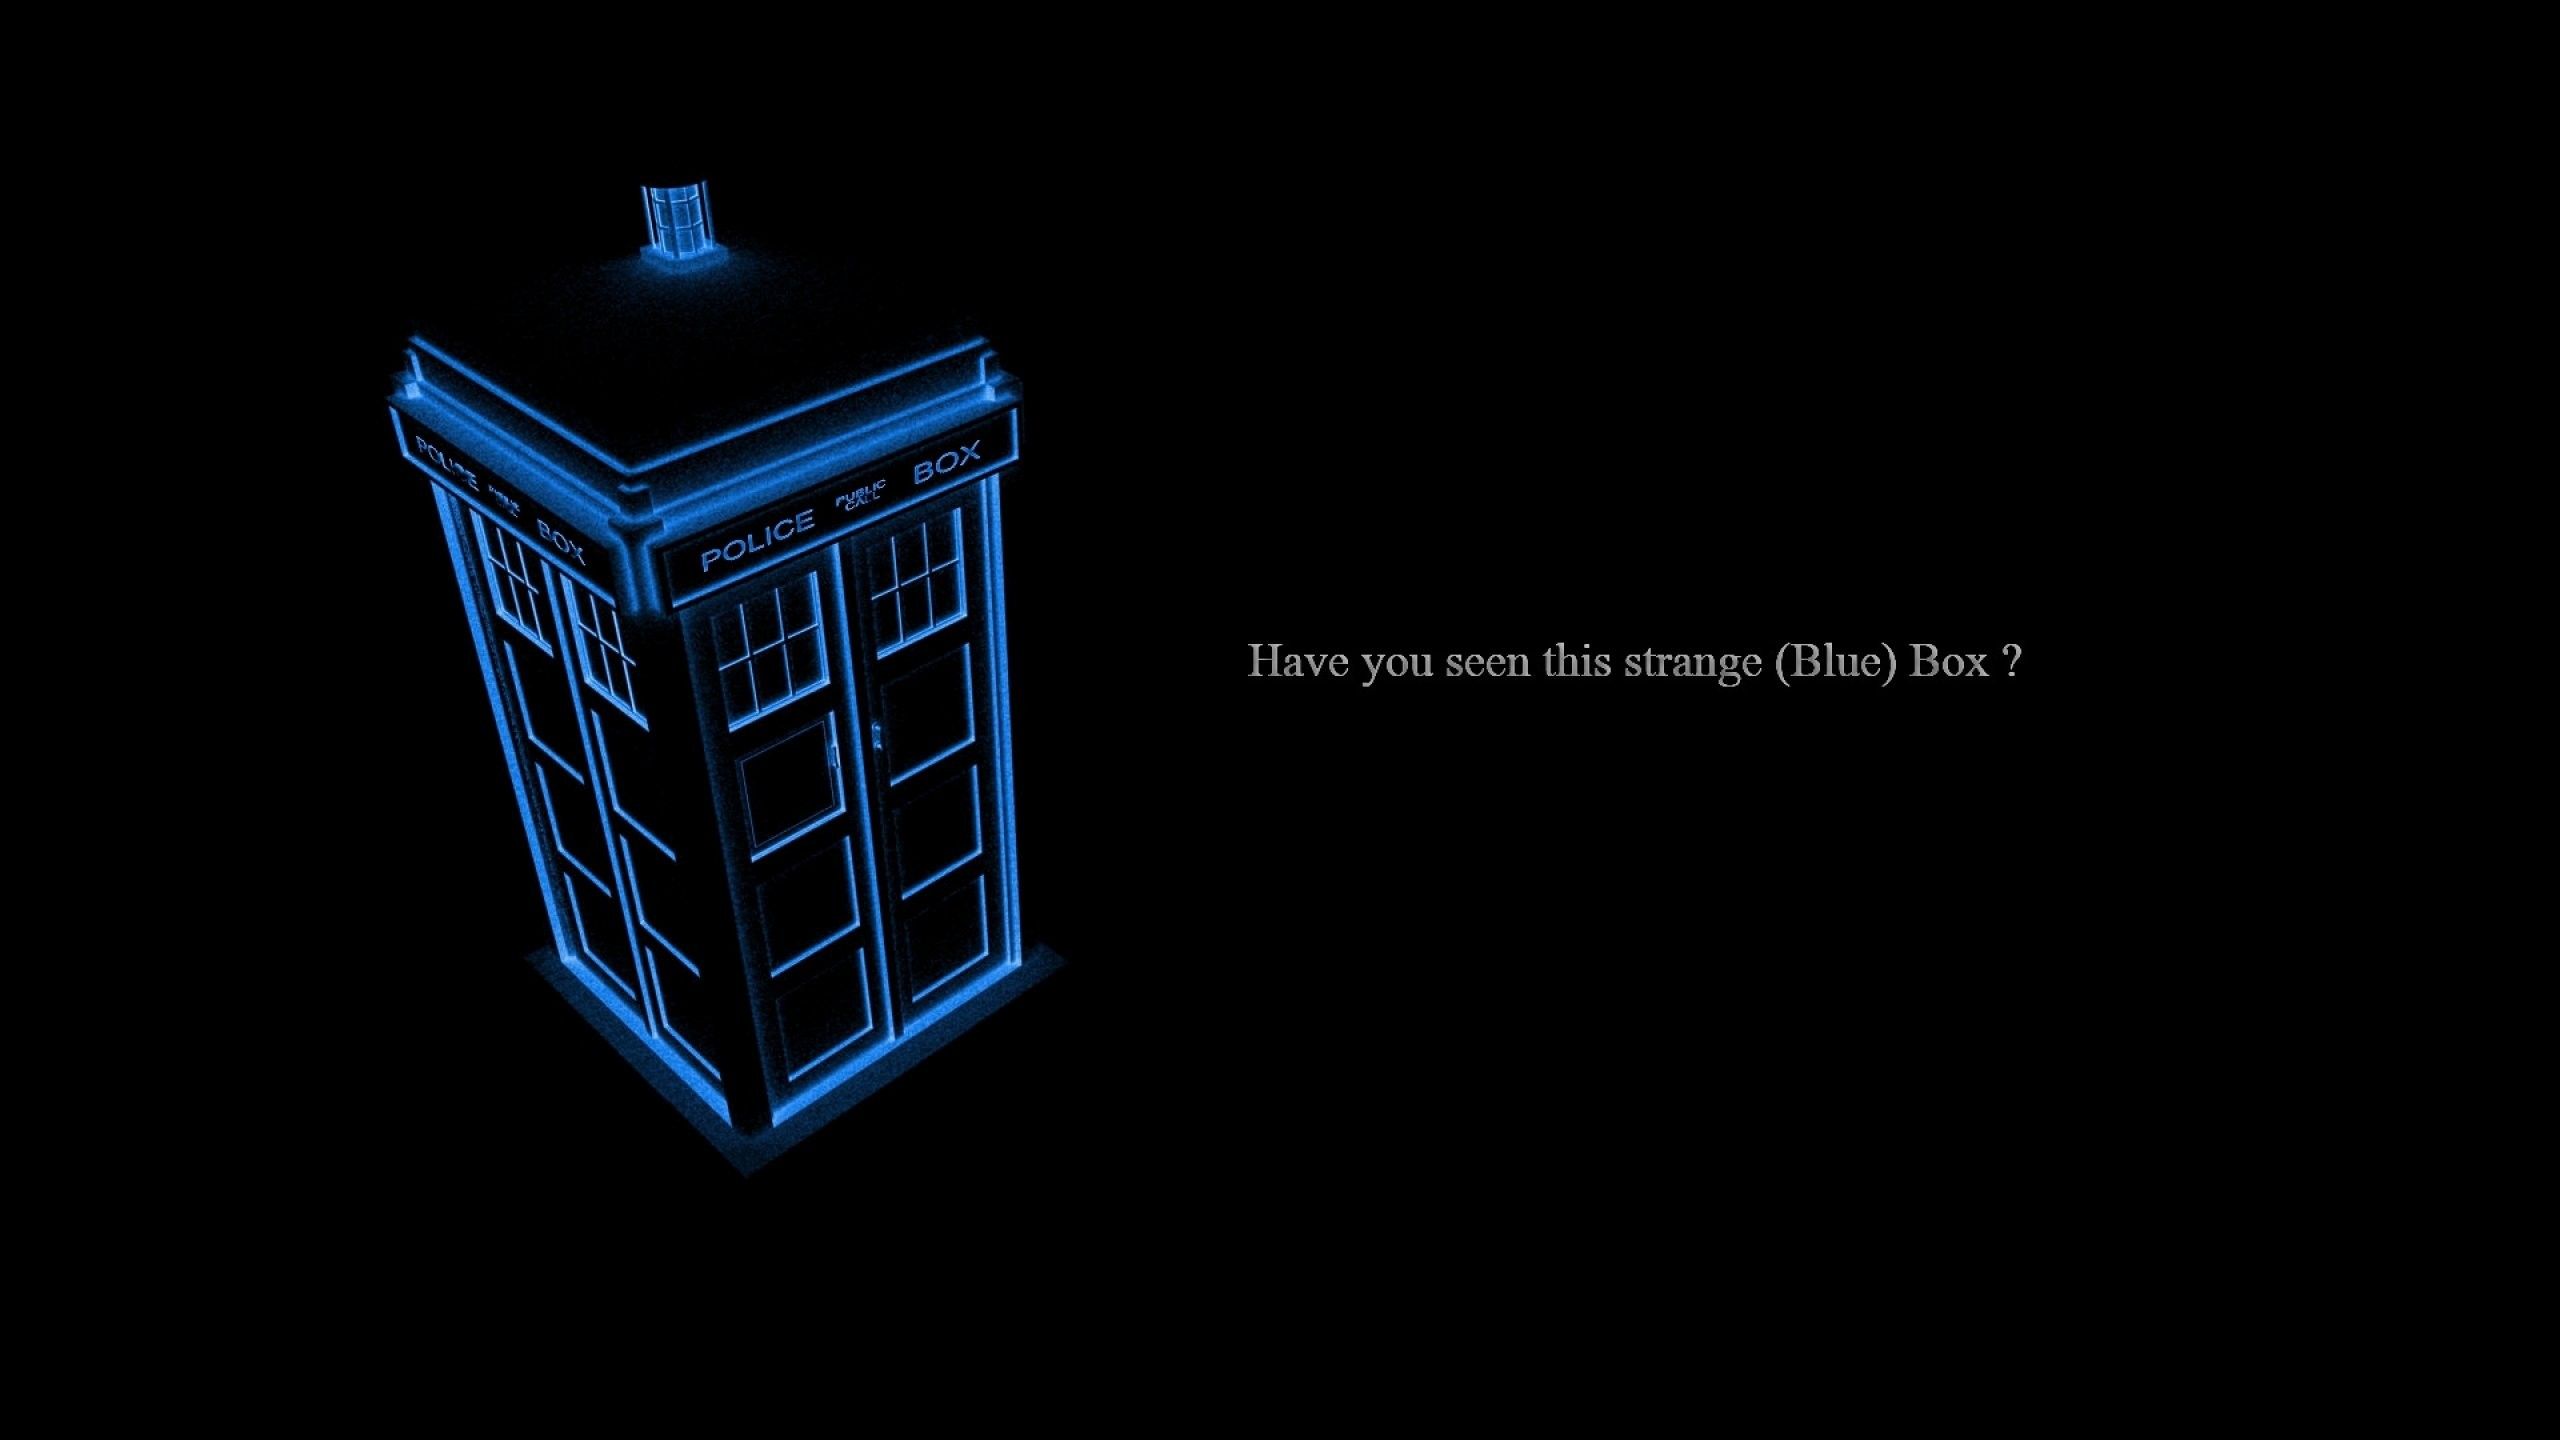 Poster, Futuristic, Adventure, doctor, Tardis, Love Quotes, Bbc, Think, HD Quotes, Dwho, Comedy, Drama, Lovely, Scifi, Download Series, Who. Full HD Wallpaper